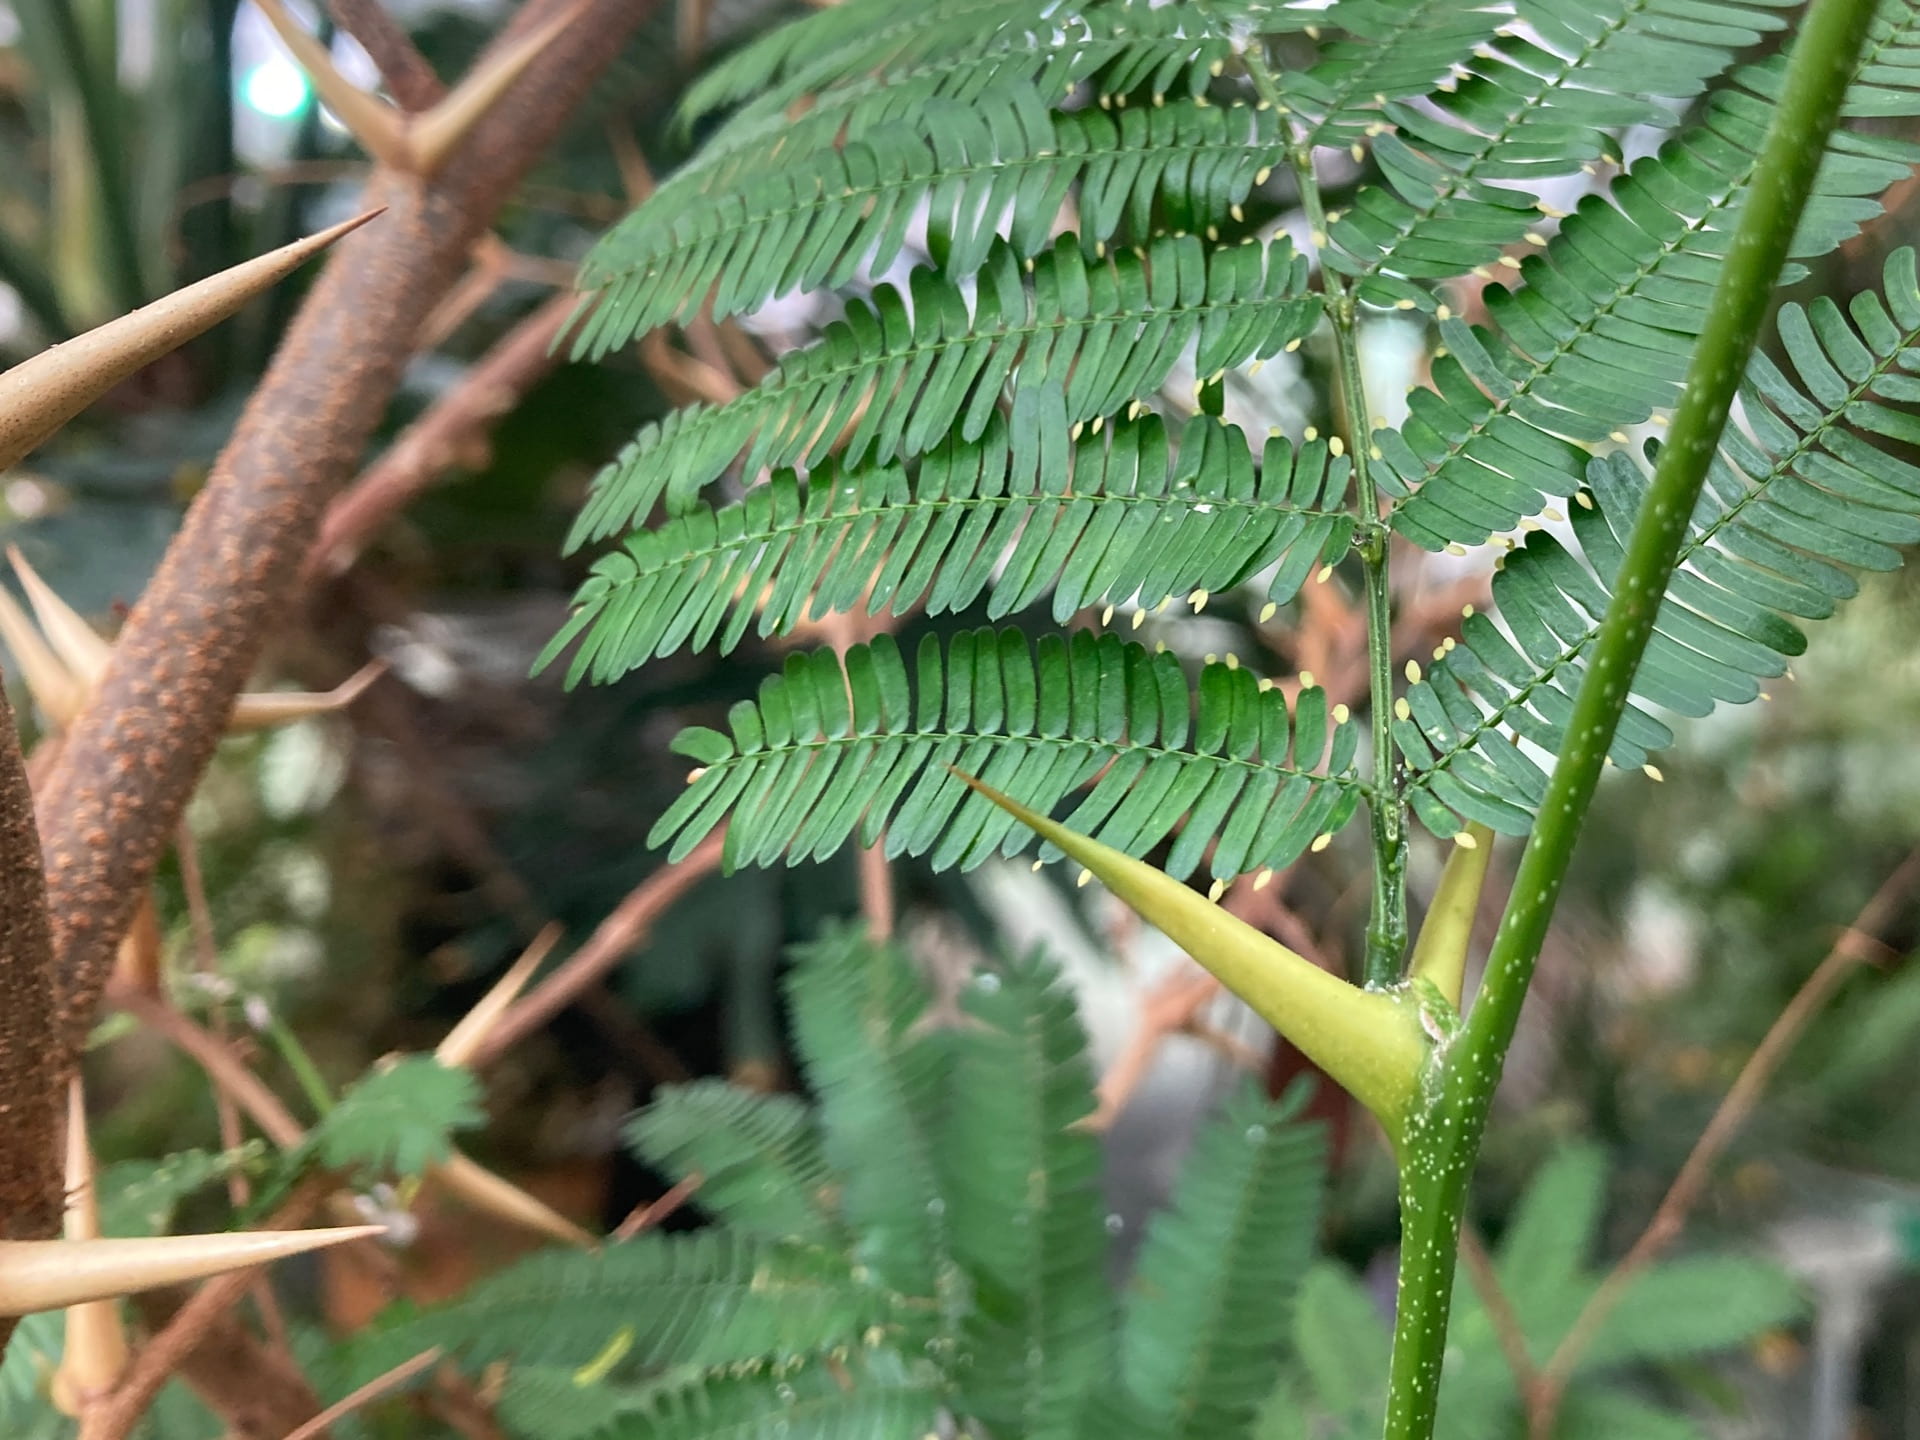 The bullhorn acacia, Vachellia cornigera, provides a habitat for ants in its hollow thorns and produces protein, sugar, and lipid rich Beltian bodies at the tips of it's leaves as food.